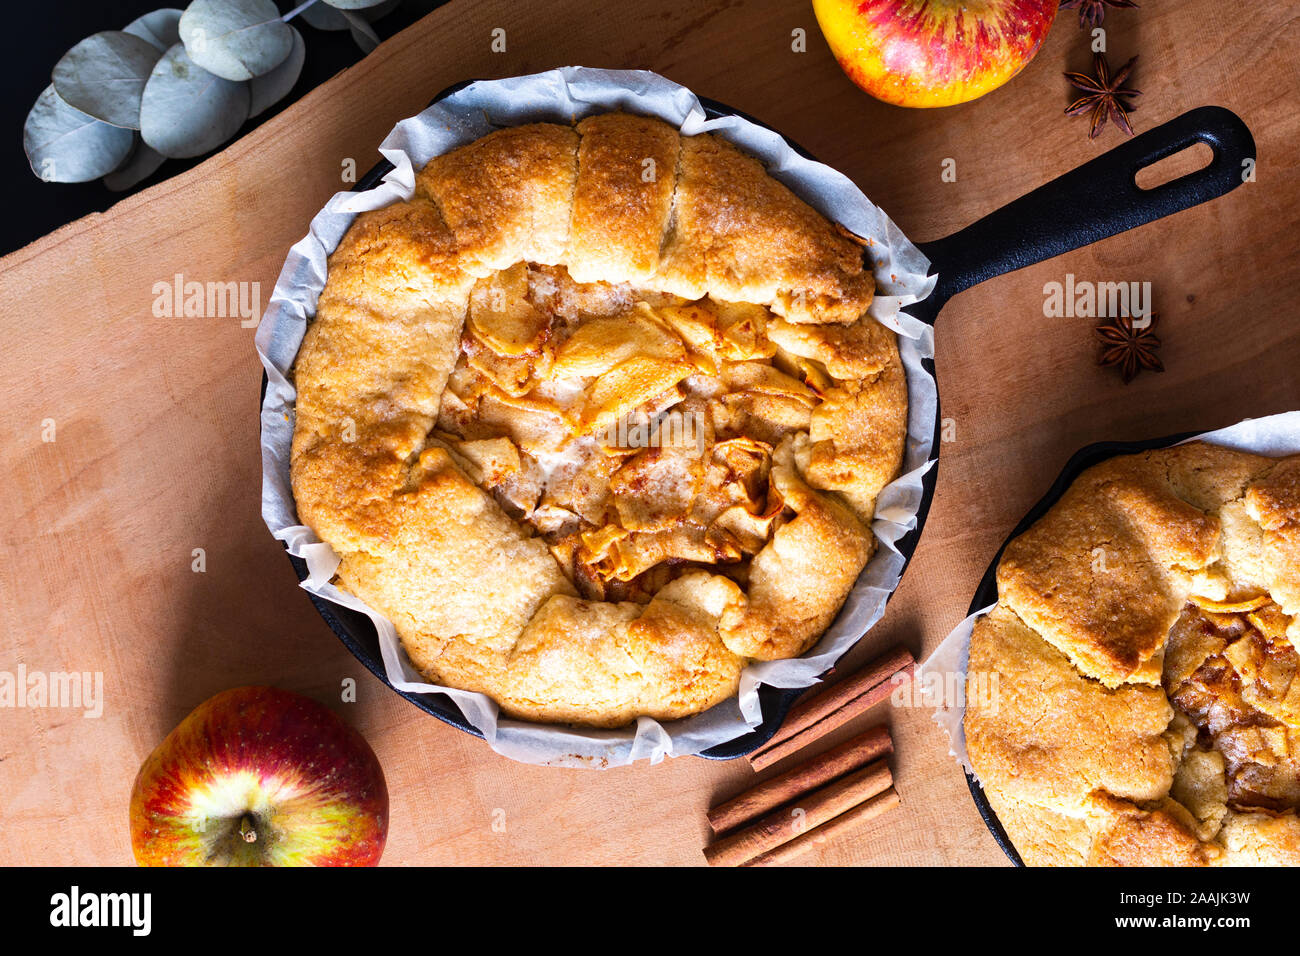 Food concept fresh baked golden Homemade Organic Apple Galette pie buttery crust in iron skillet pan with copy space Stock Photo